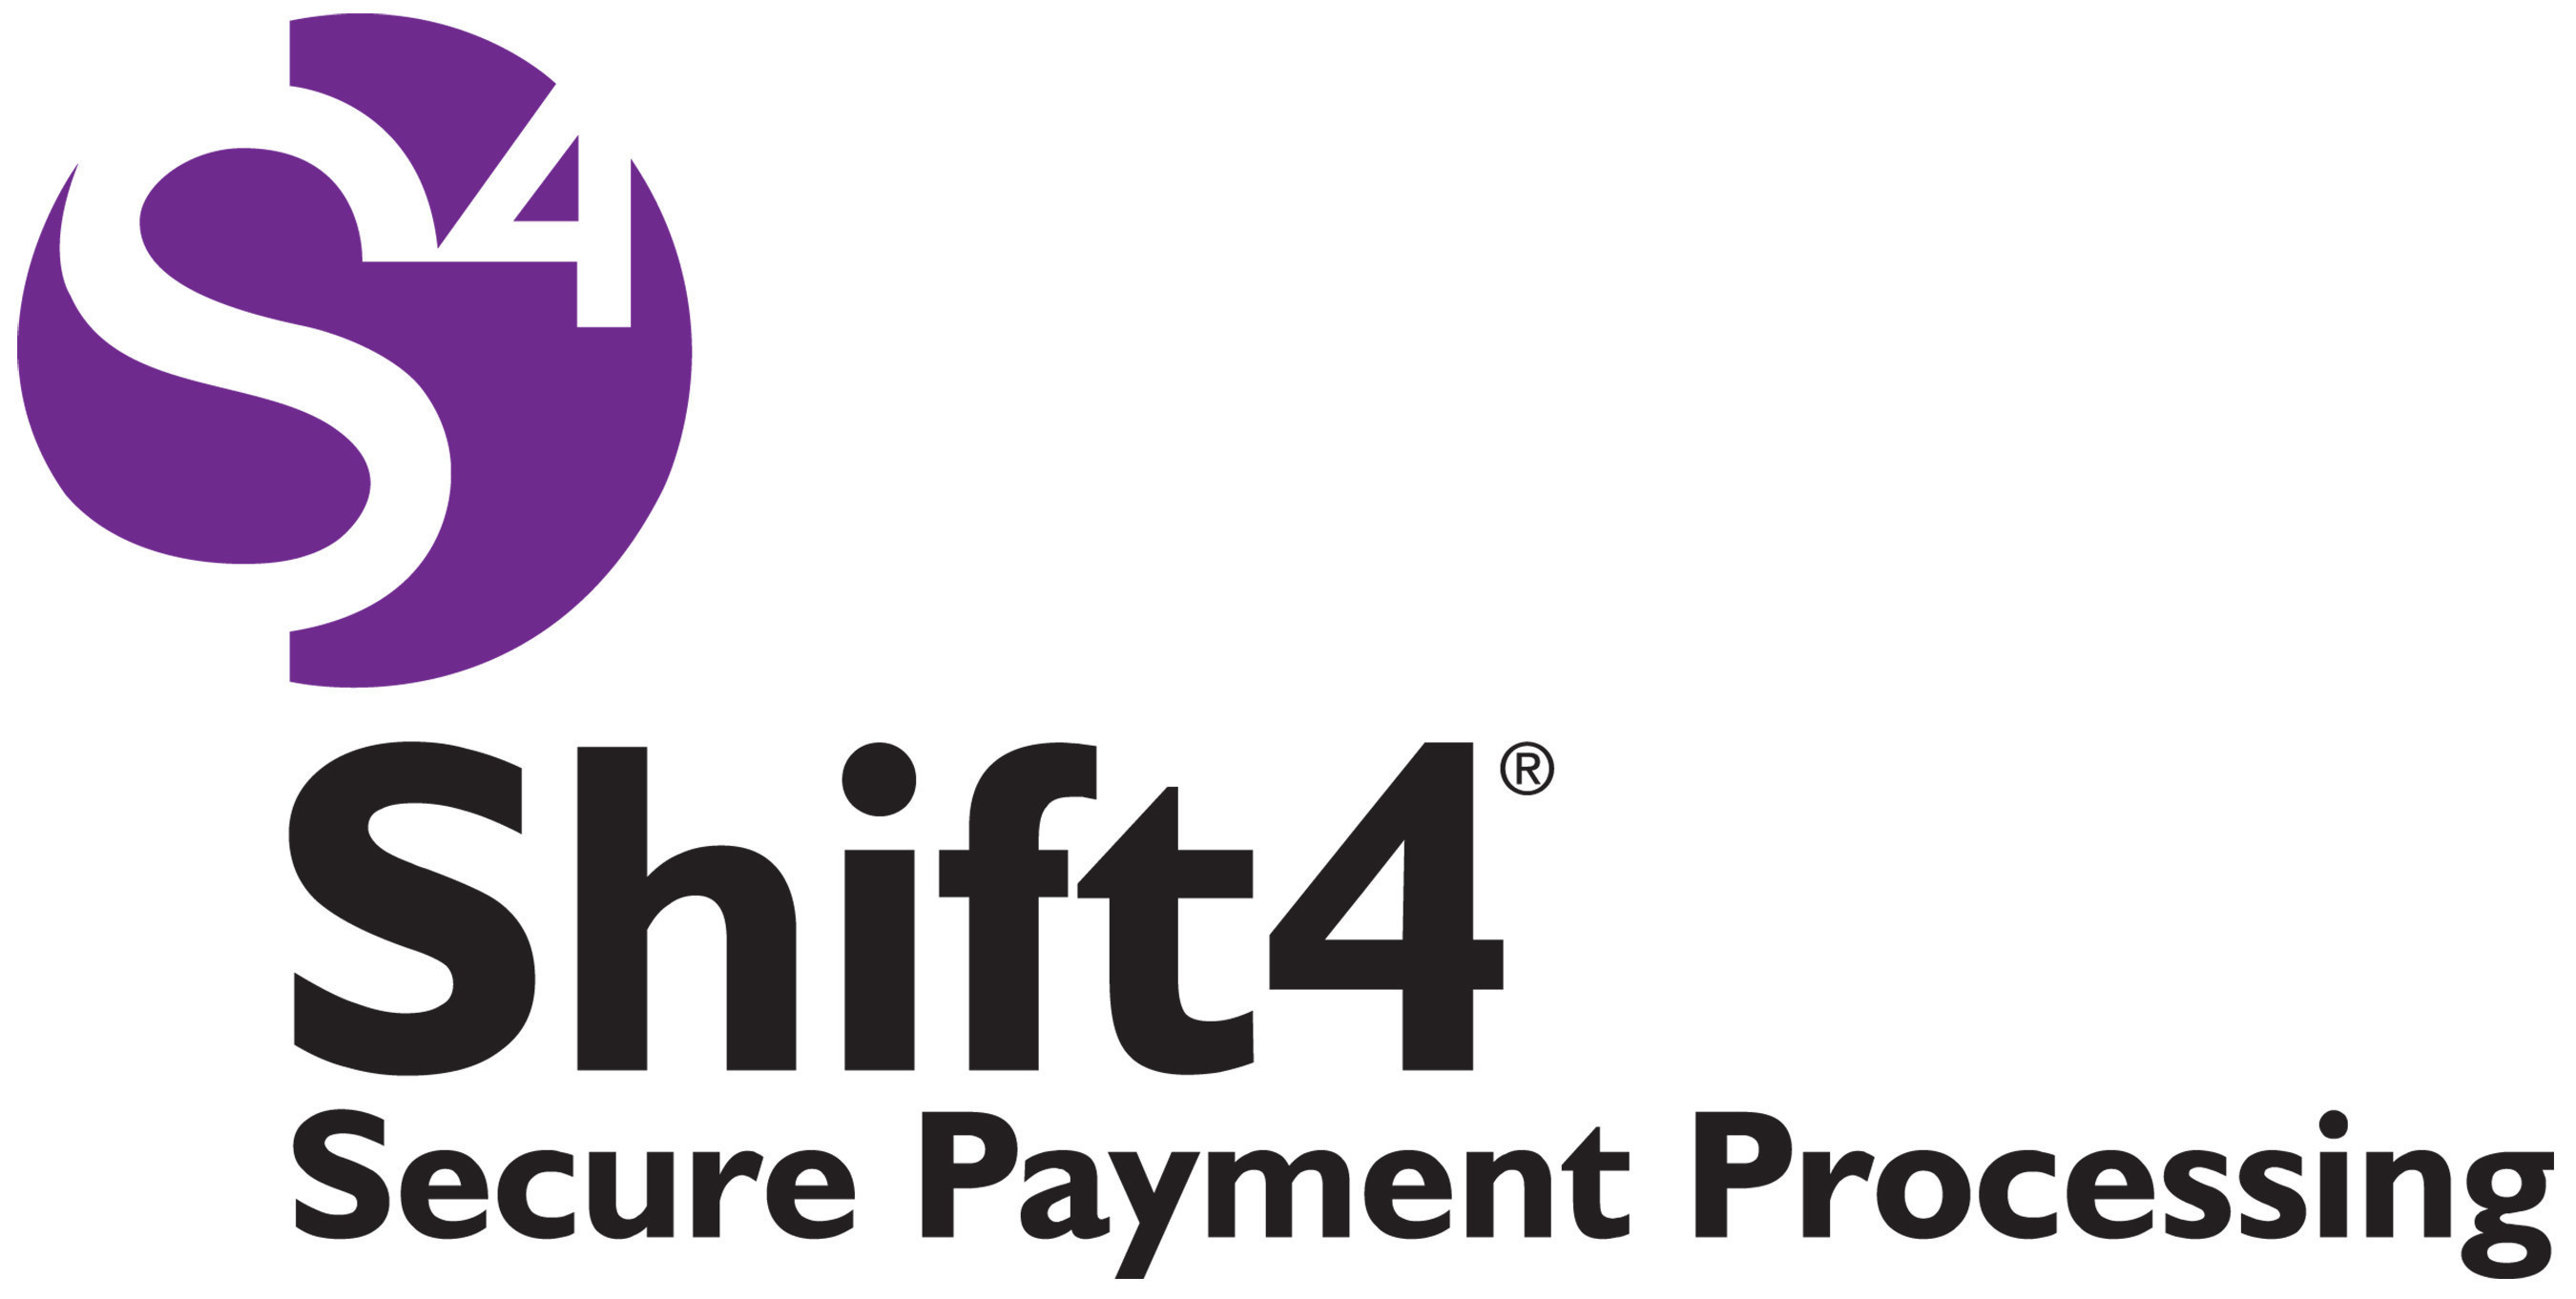 Shift4 is dedicated to maintaining the trust of more than 24,000 merchants who rely on their DOLLARS ON THE NET(R) payment gateway to process upwards of half a billion credit, debit, and gift card transactions each year. Shift4's commitment to innovation keeps them at the forefront of emerging technologies including P2PE, mobile payments, EMV, and tokenization. Shift4 helps businesses secure the lowest possible payment processing rates and protect their brands by securing their customers' card data.